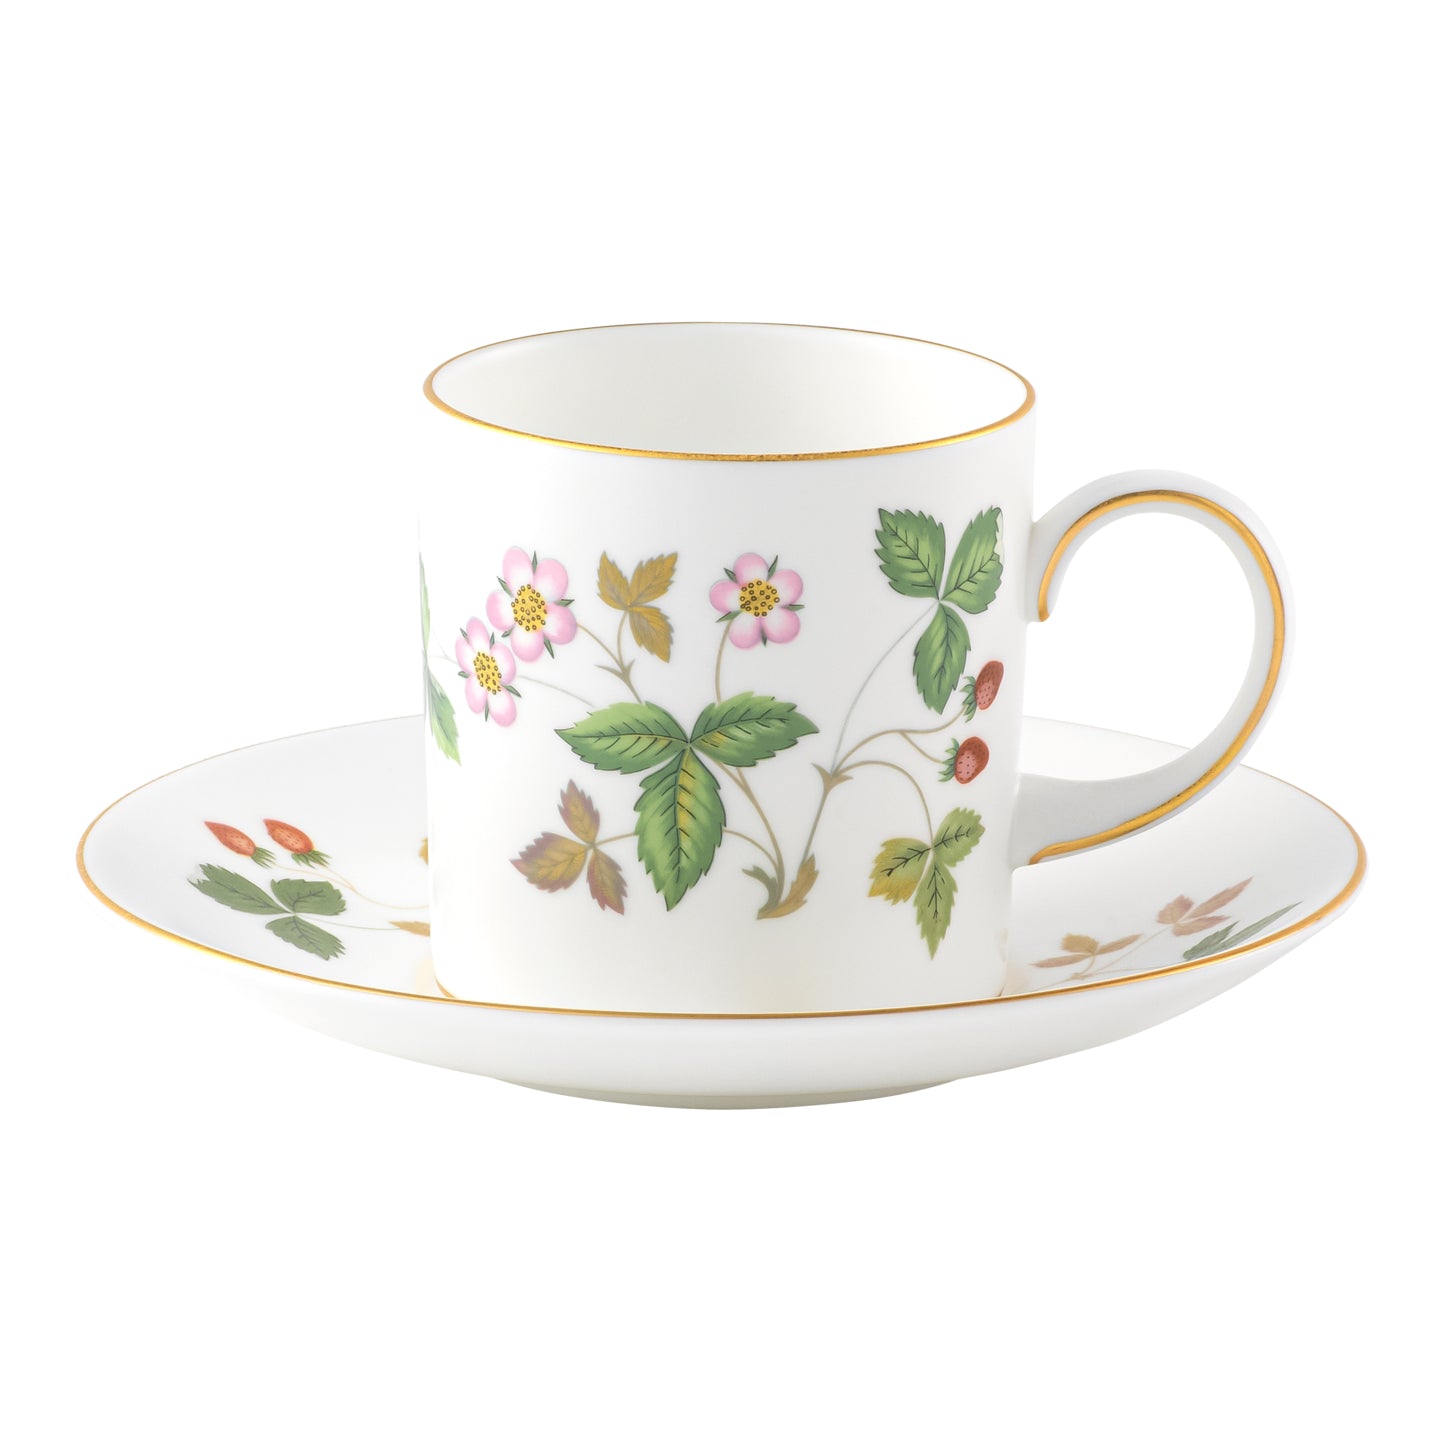 Wedgwood Wild Strawberry Coffee Cup & Saucer - Set of 2